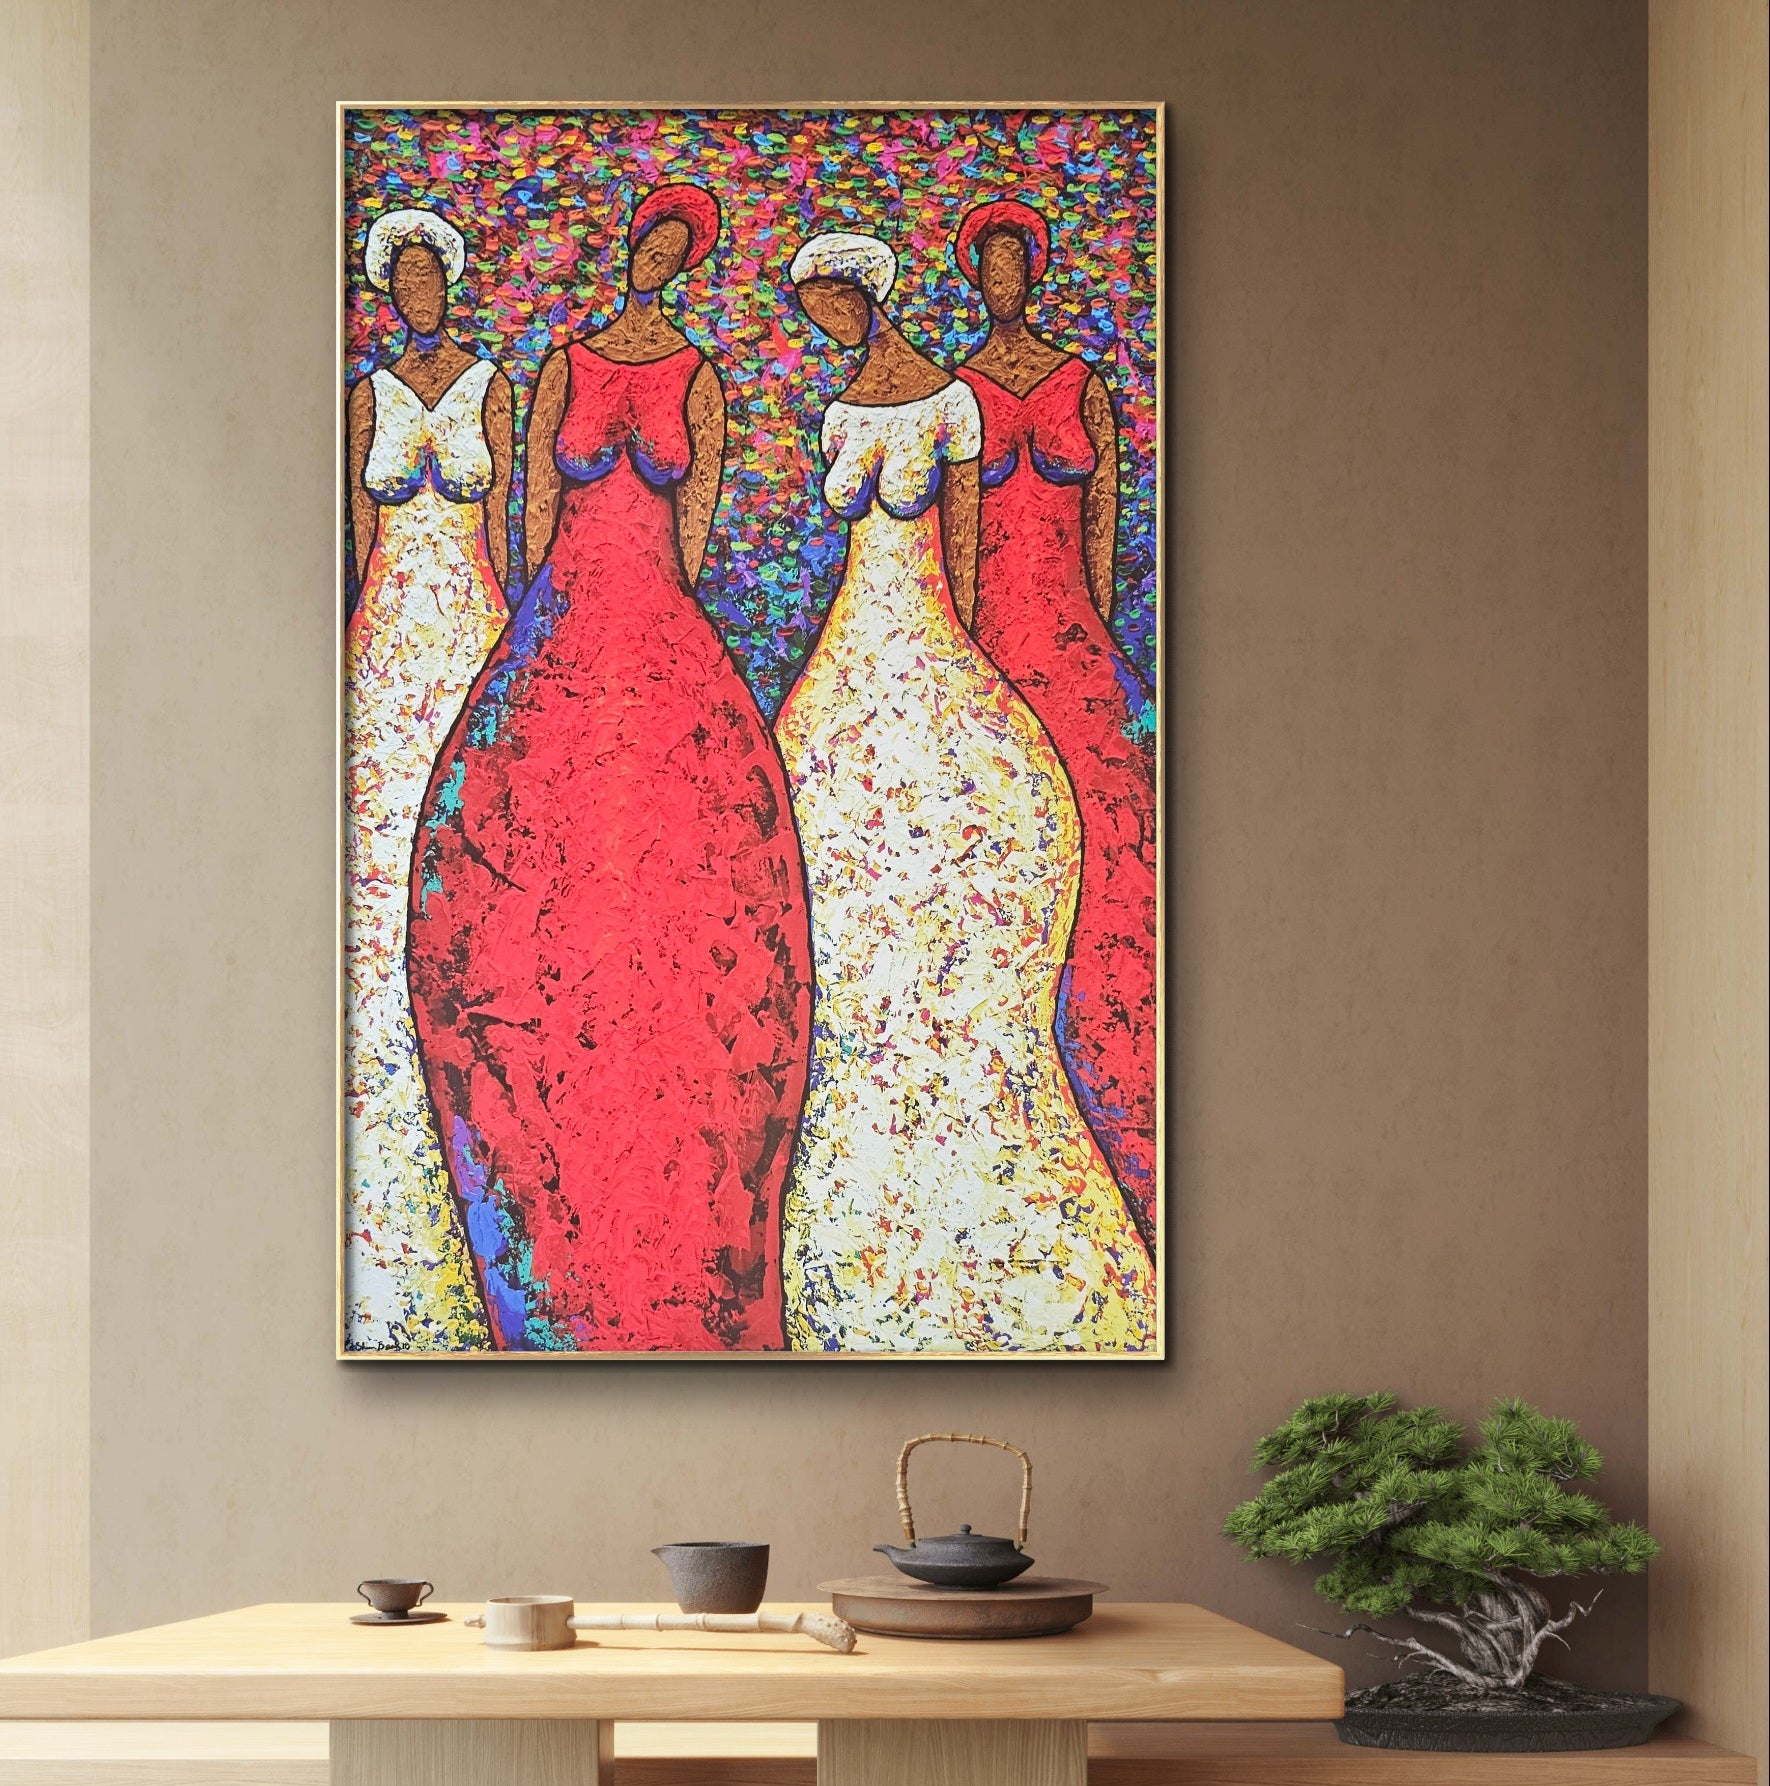 Sister Love Giclee on Canvas